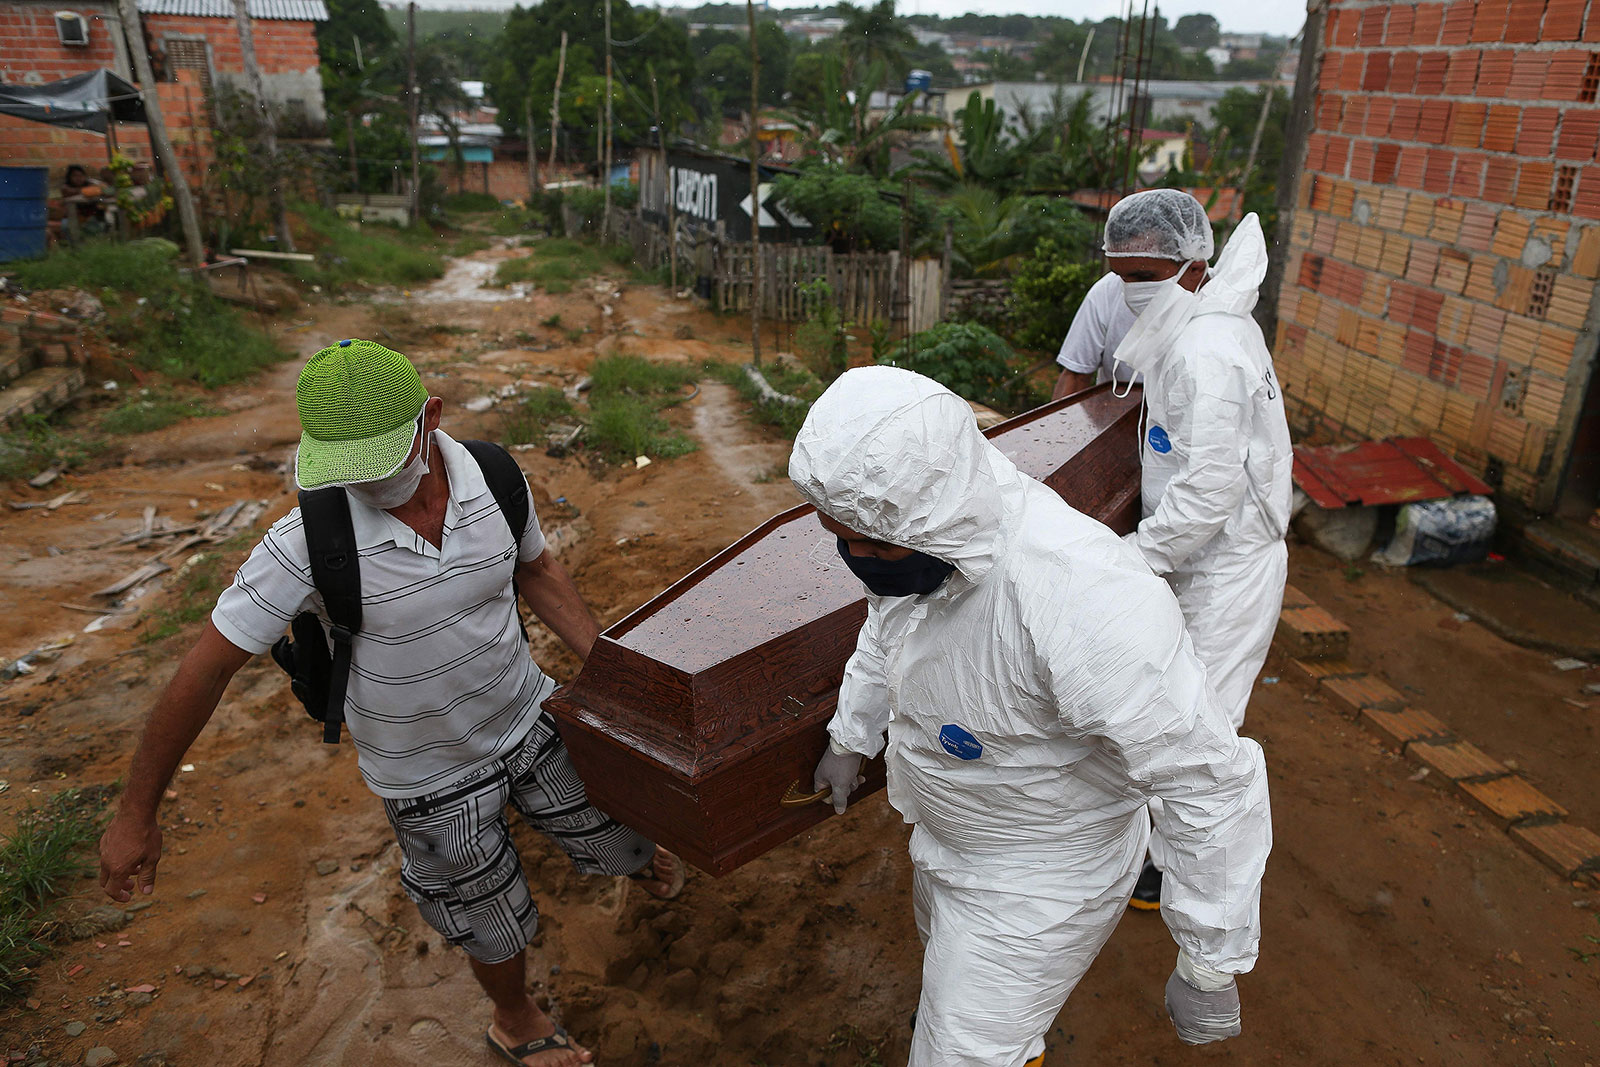 Workers remove a body from a home in Manaus, Brazil, on May 4.